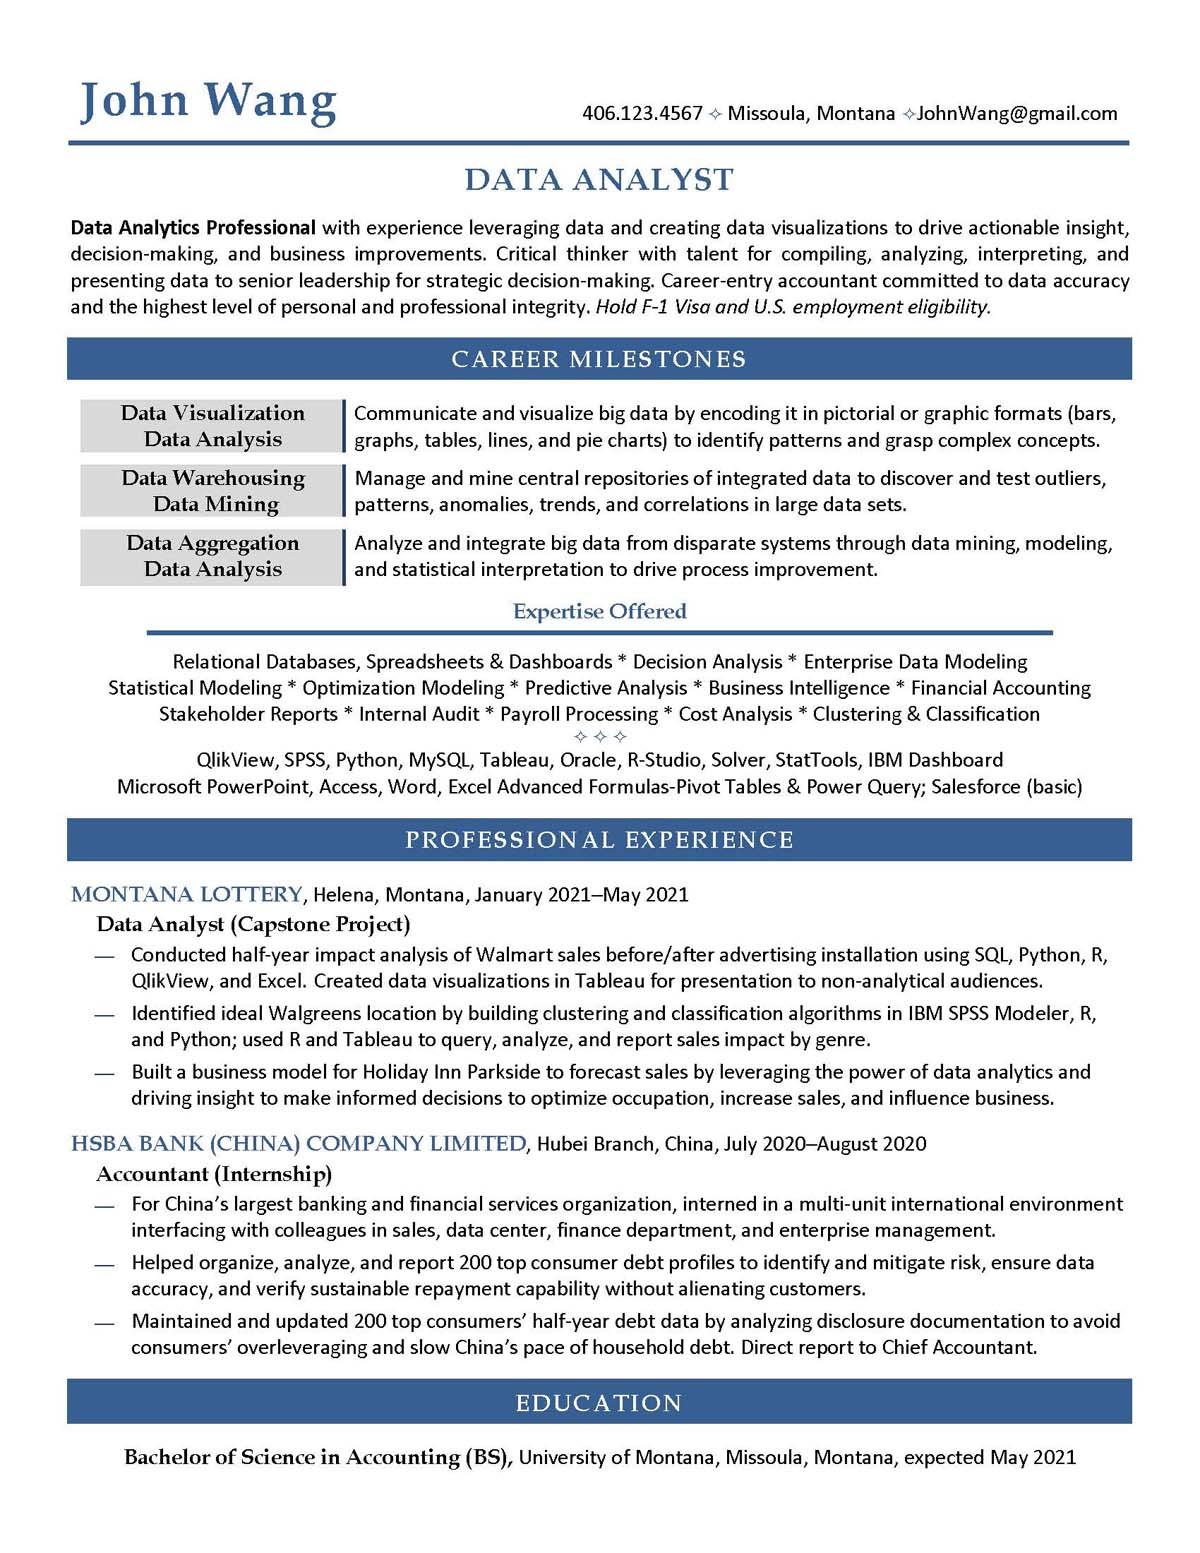 Sample resume: Business Administration and Management, Low Experience, Combination